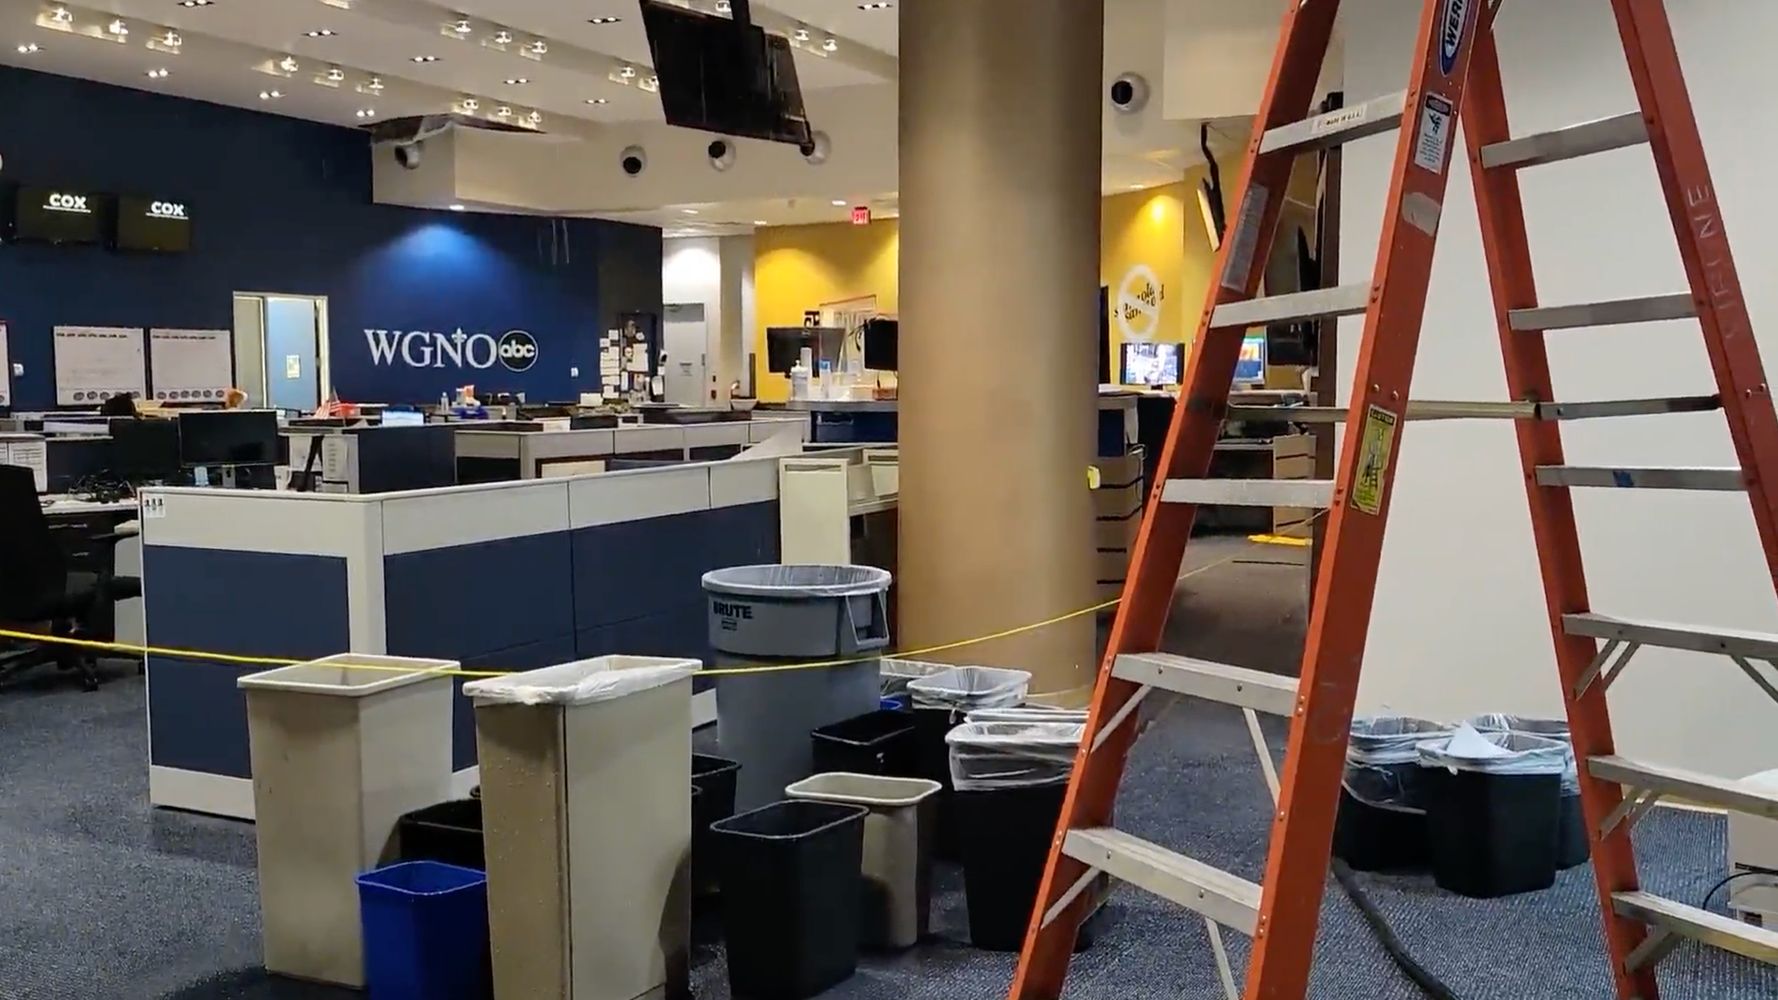 Parts Of Ceiling 'Peeled Away' As Hurricane Ida Tears Through New Orleans TV Station